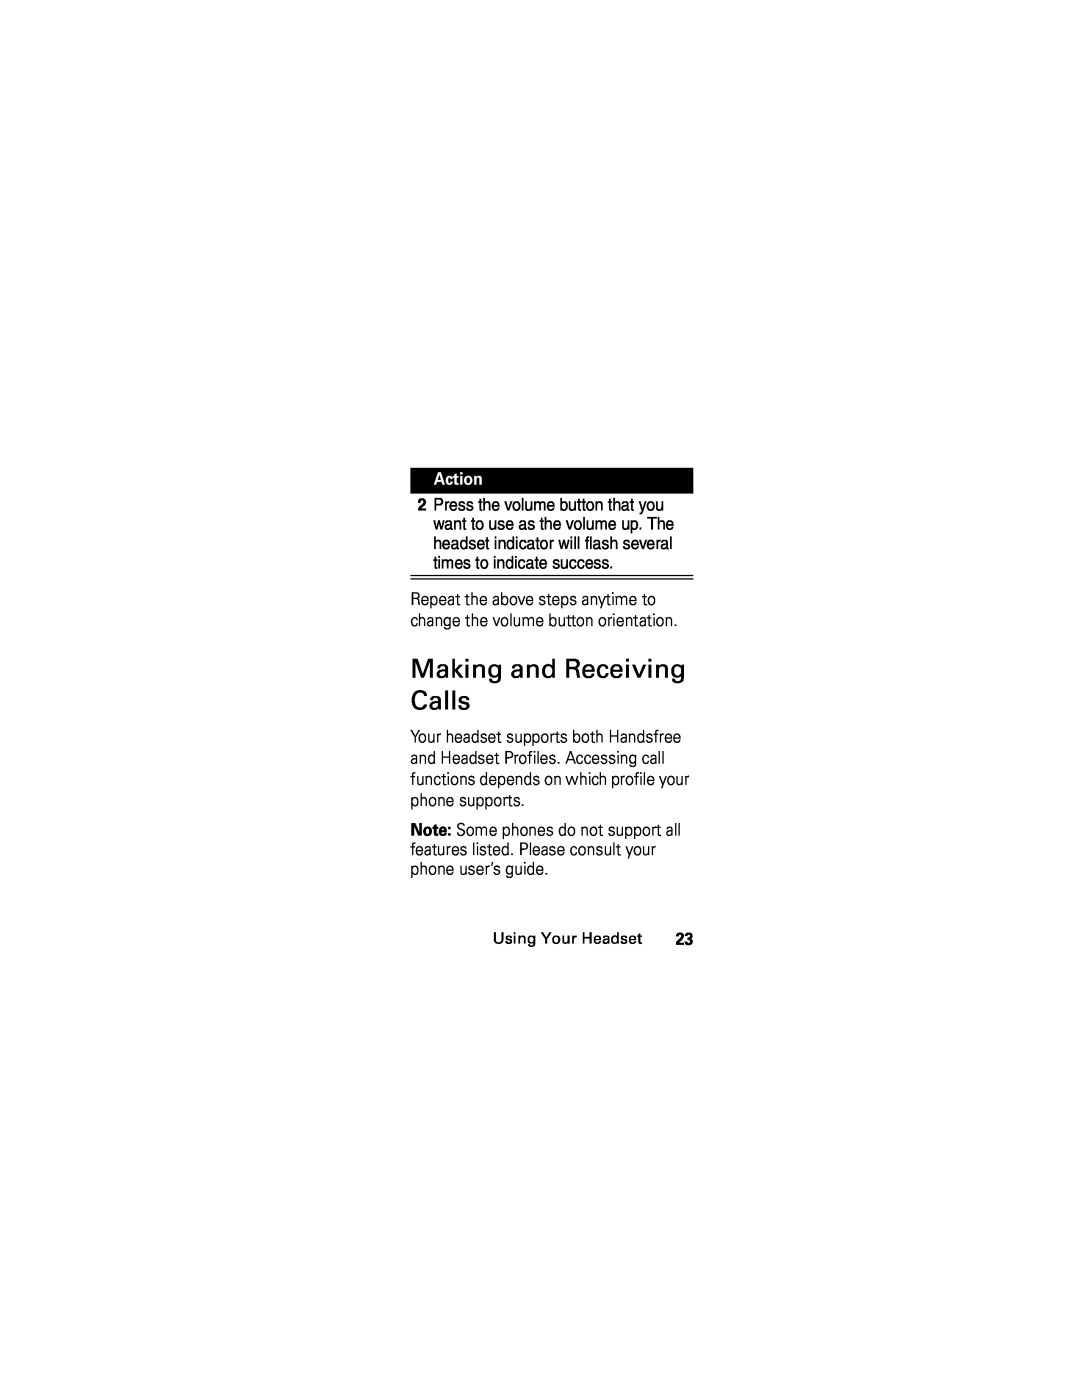 Motorola HS850 manual Making and Receiving Calls, Action, Using Your Headset 